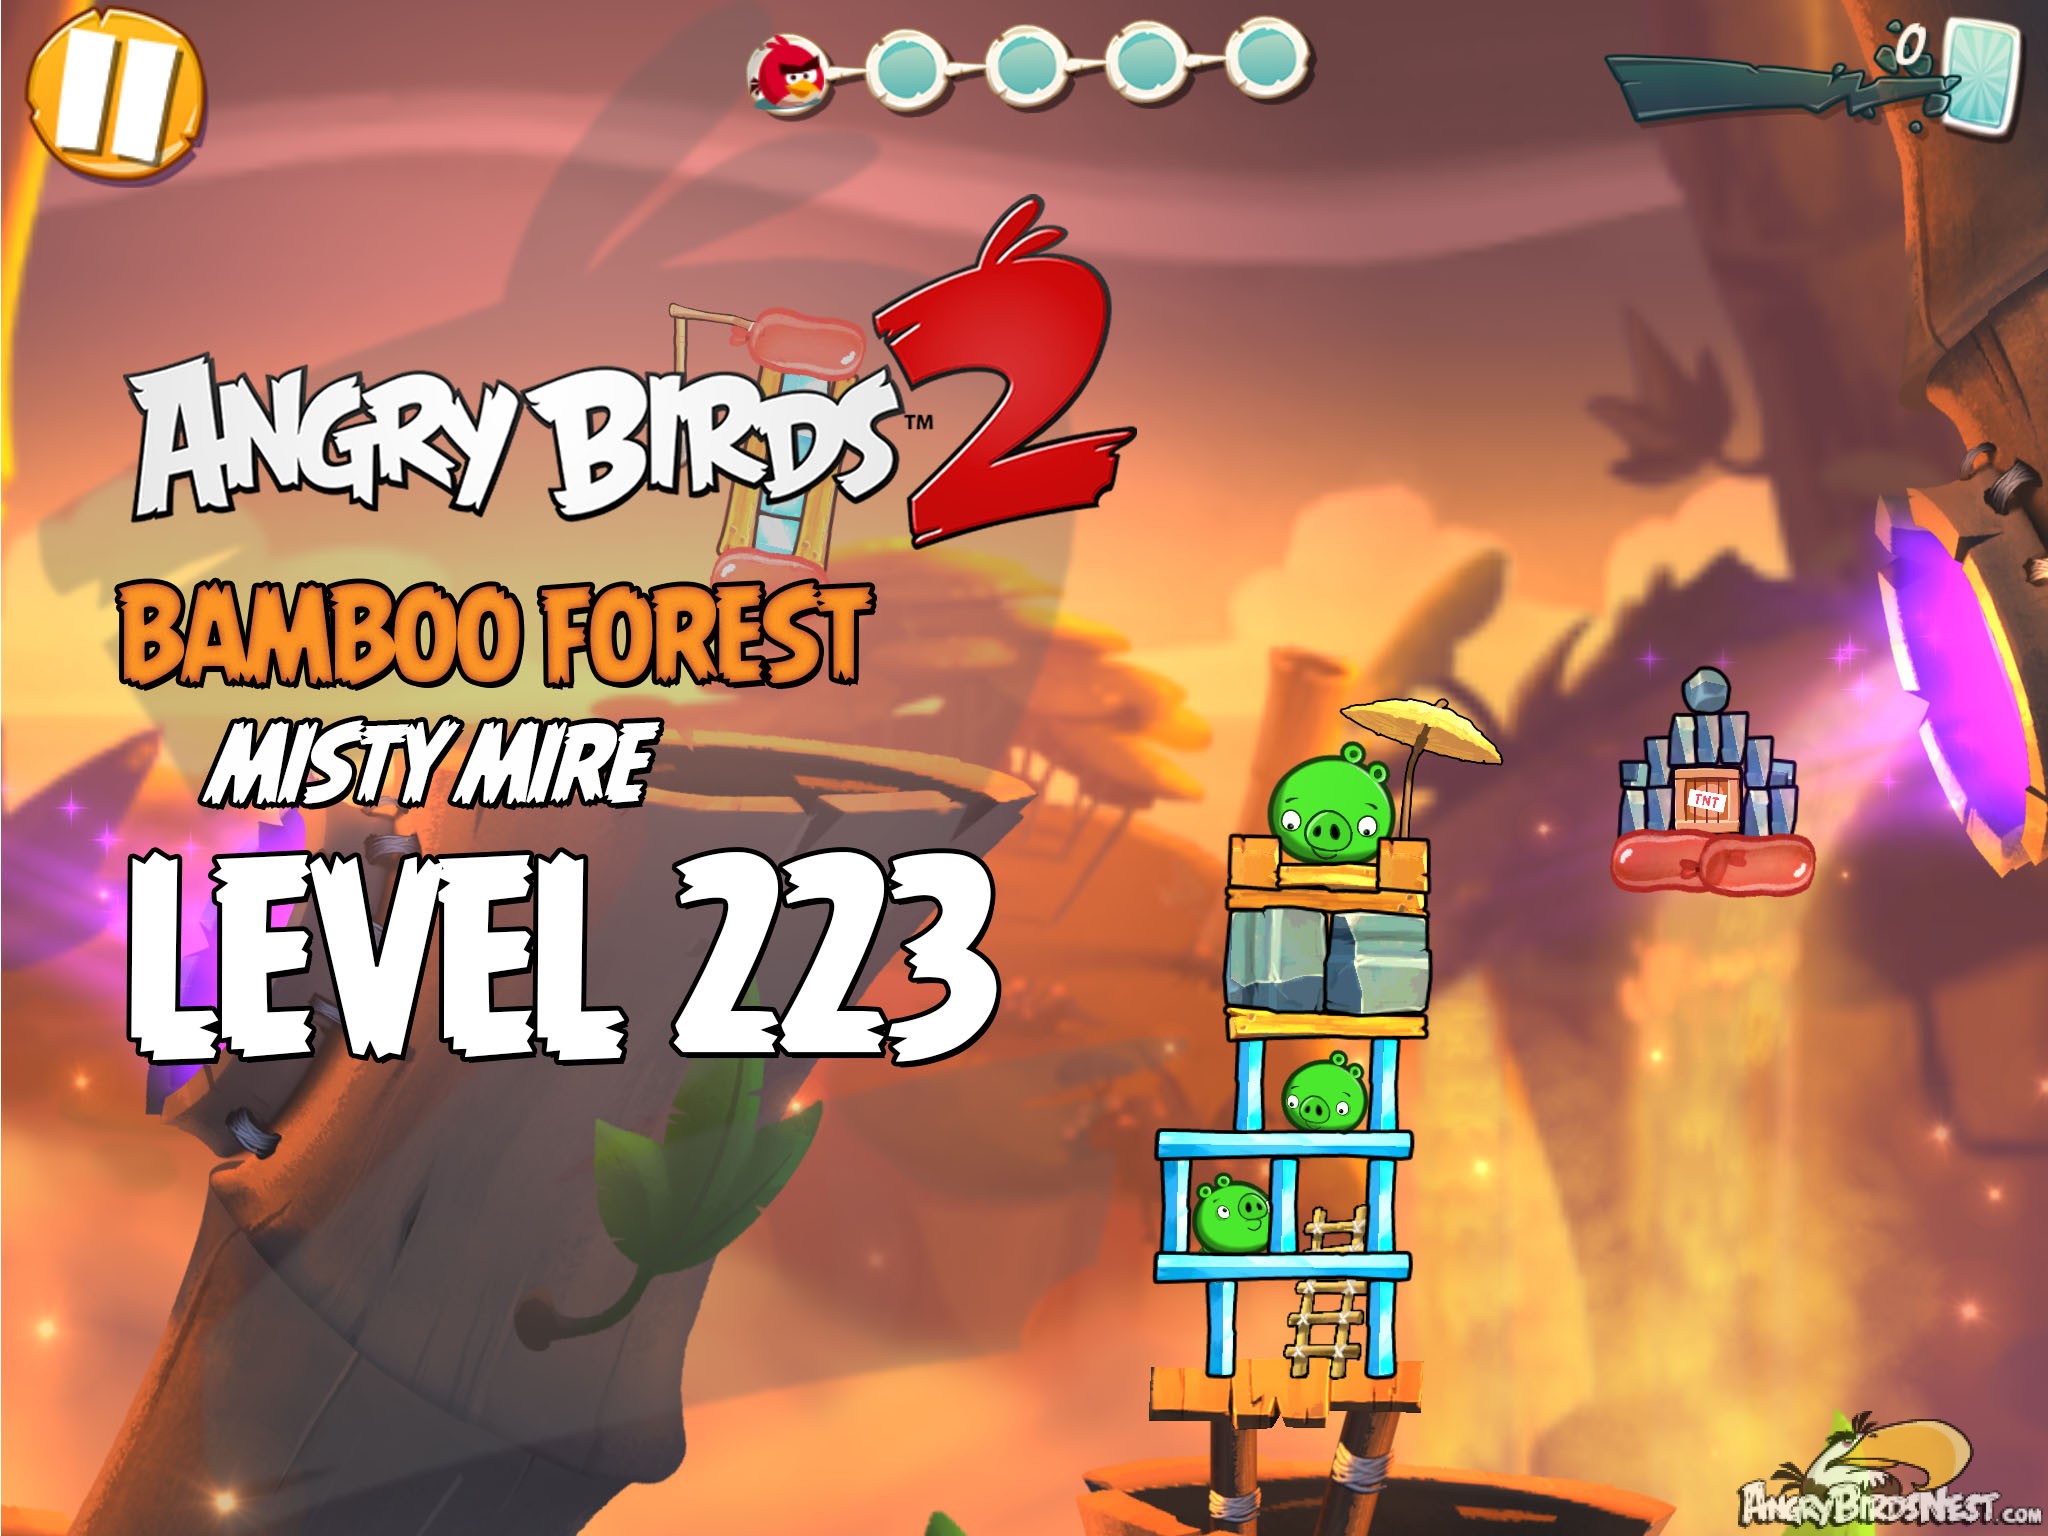 Angry Birds 2 Bamboo Forest Misty Mire Level 223